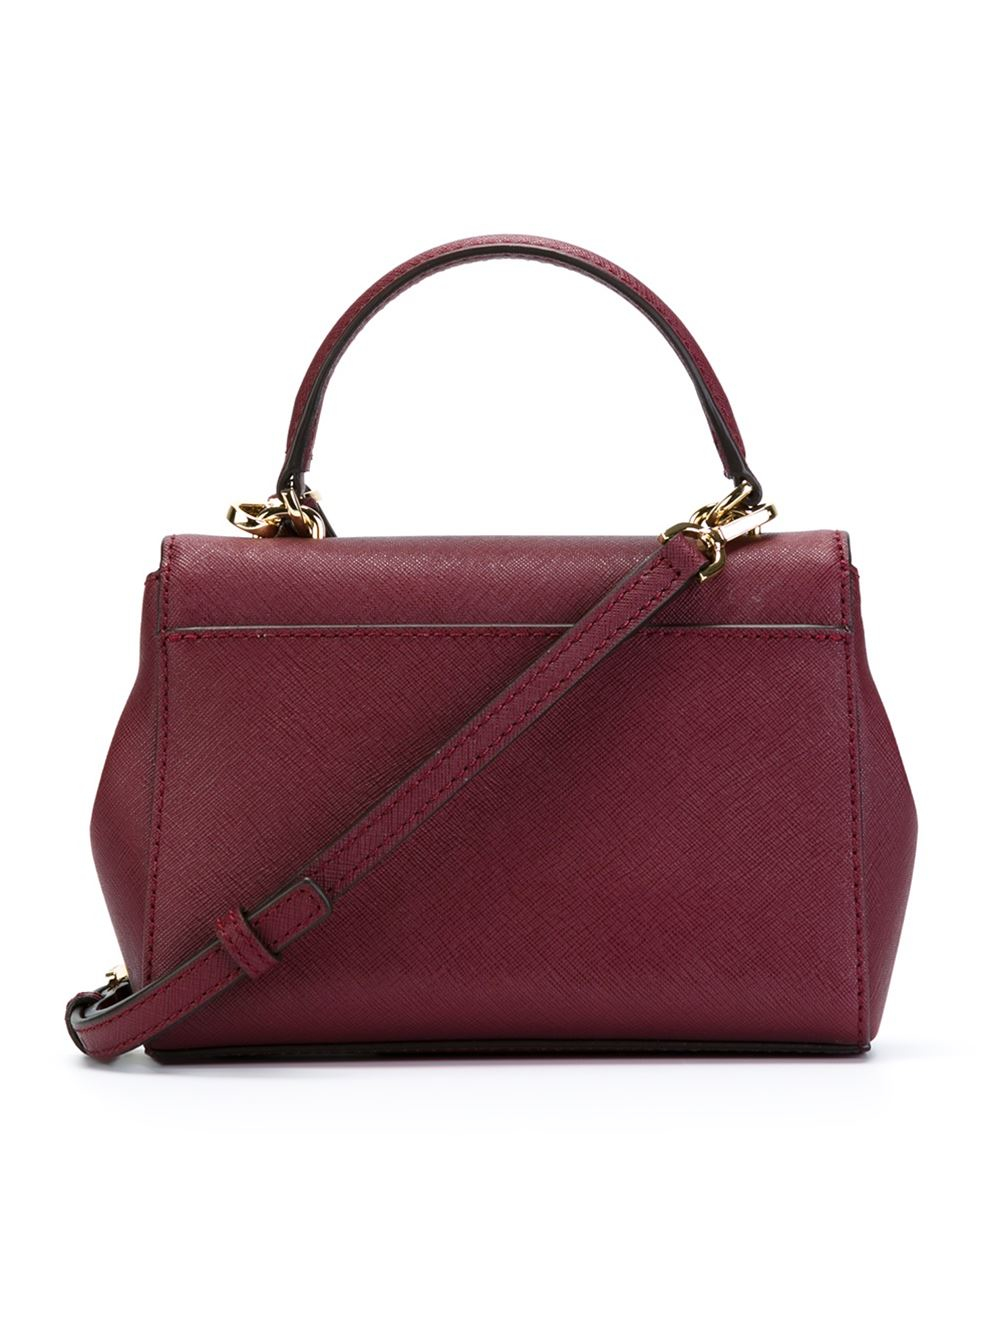 MICHAEL Michael Kors Ava Extra-Small Cross-Body Bag in Red - Lyst